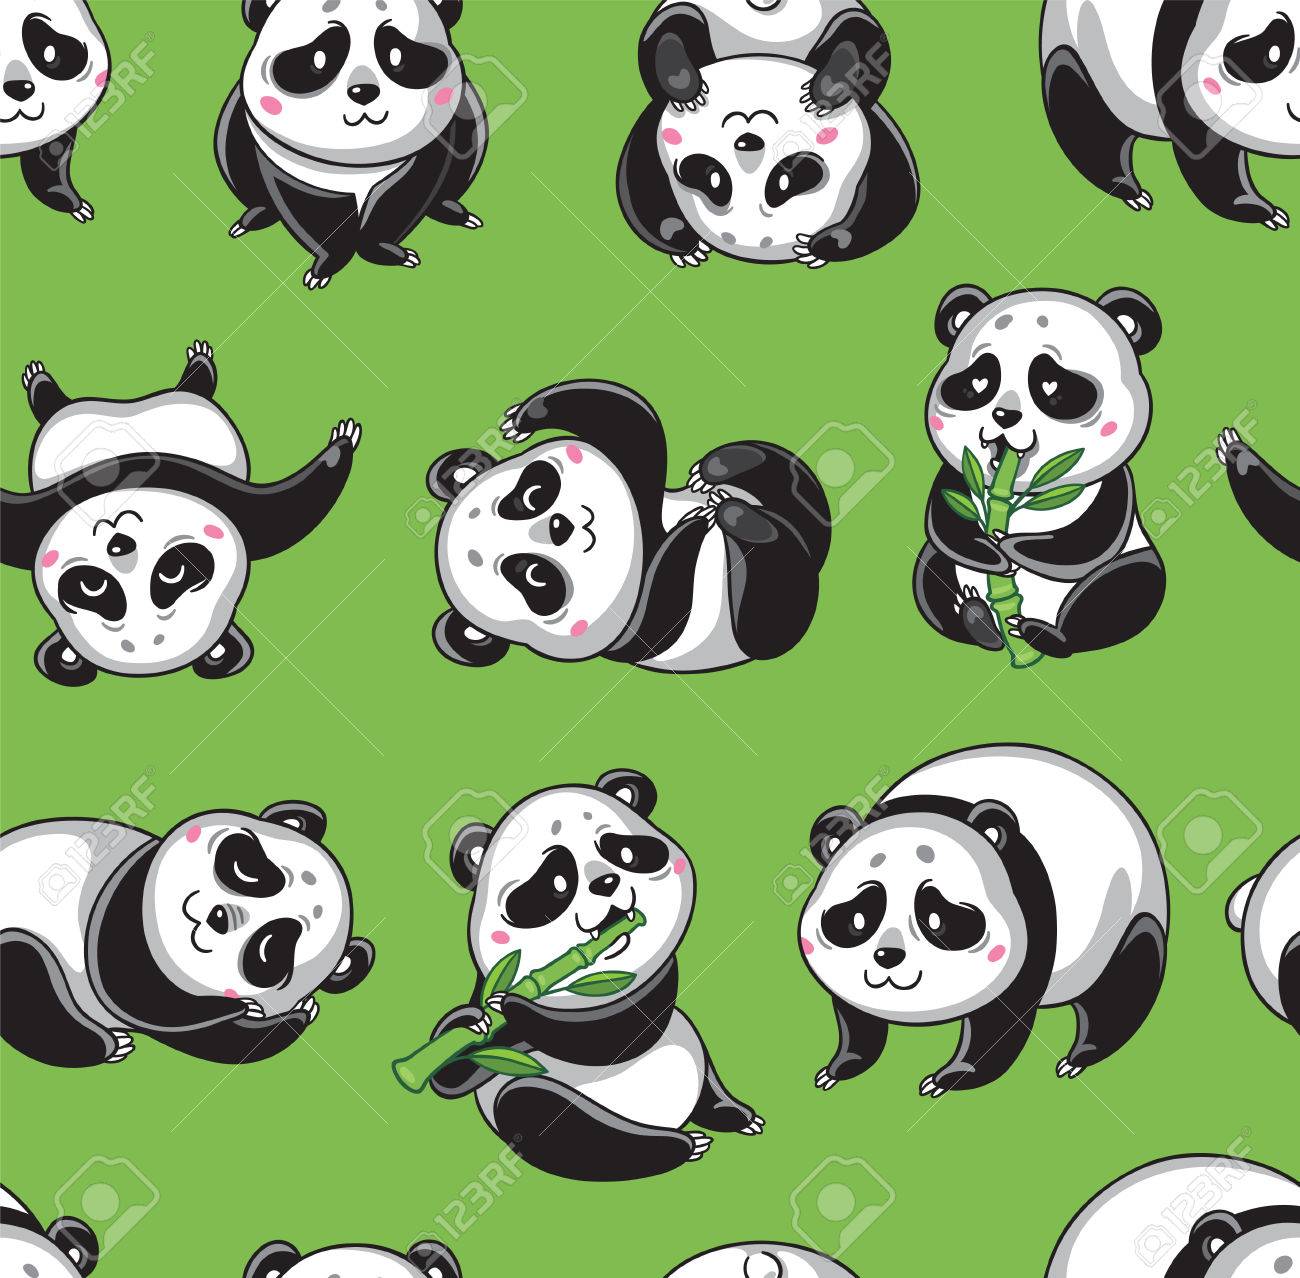 Seamless Cartoon Wallpaper With Cute Pandas Isolated On Green